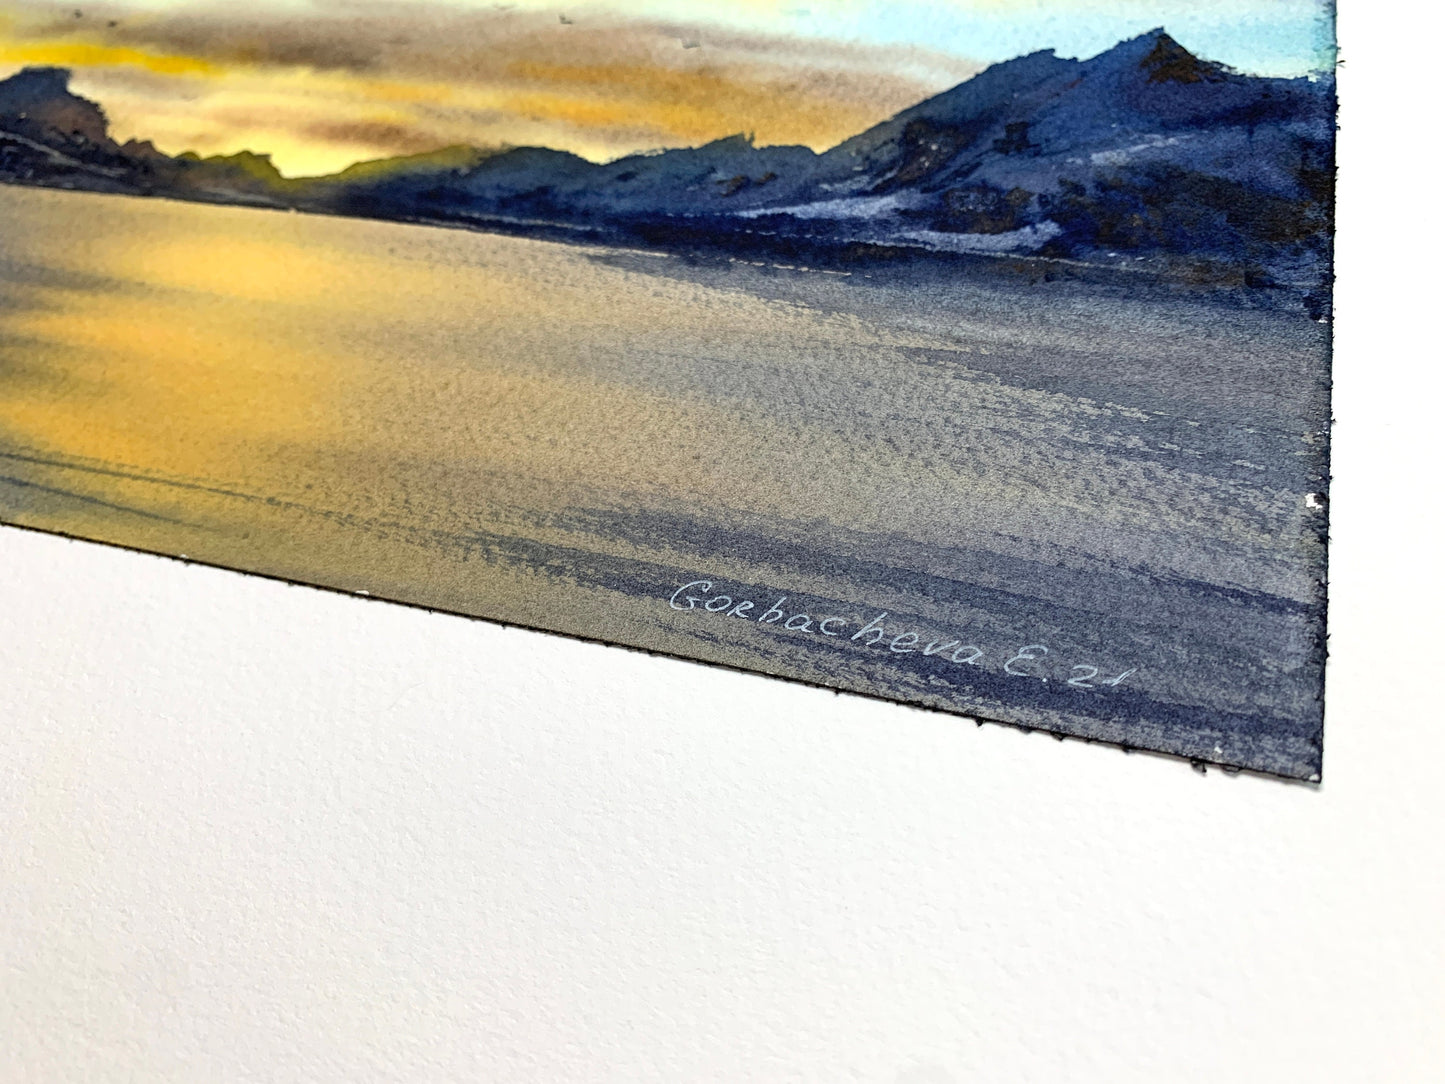 Mountain Sunset, Painting Watercolor Original, Landscape Wall Art, Mountains, Lake, Sky, Nature, Gift For Him